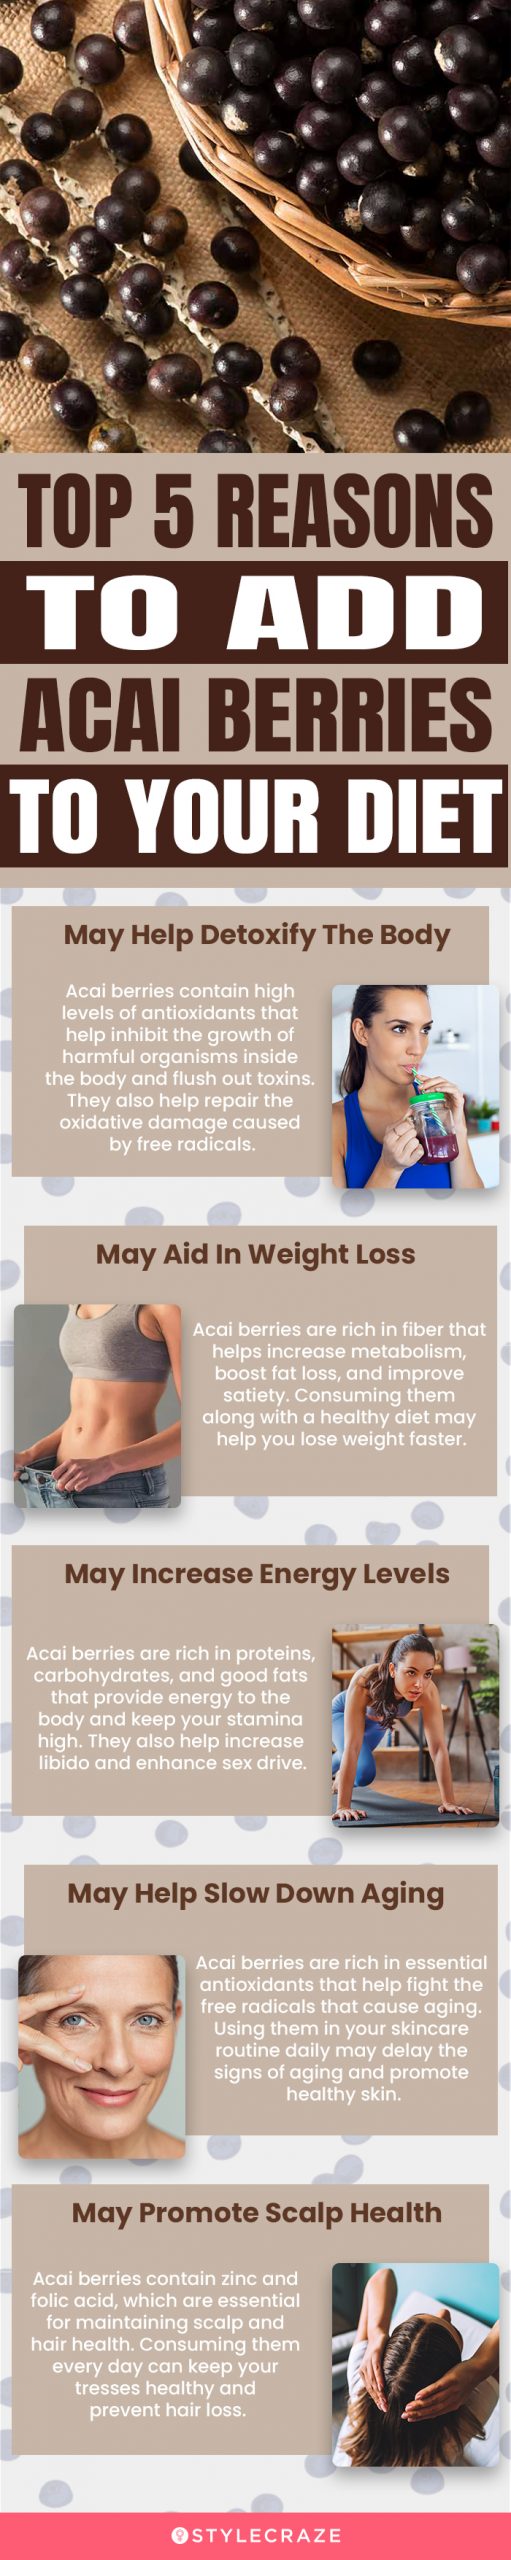 top 5 reasons to add acai berries to your diet (infographic)